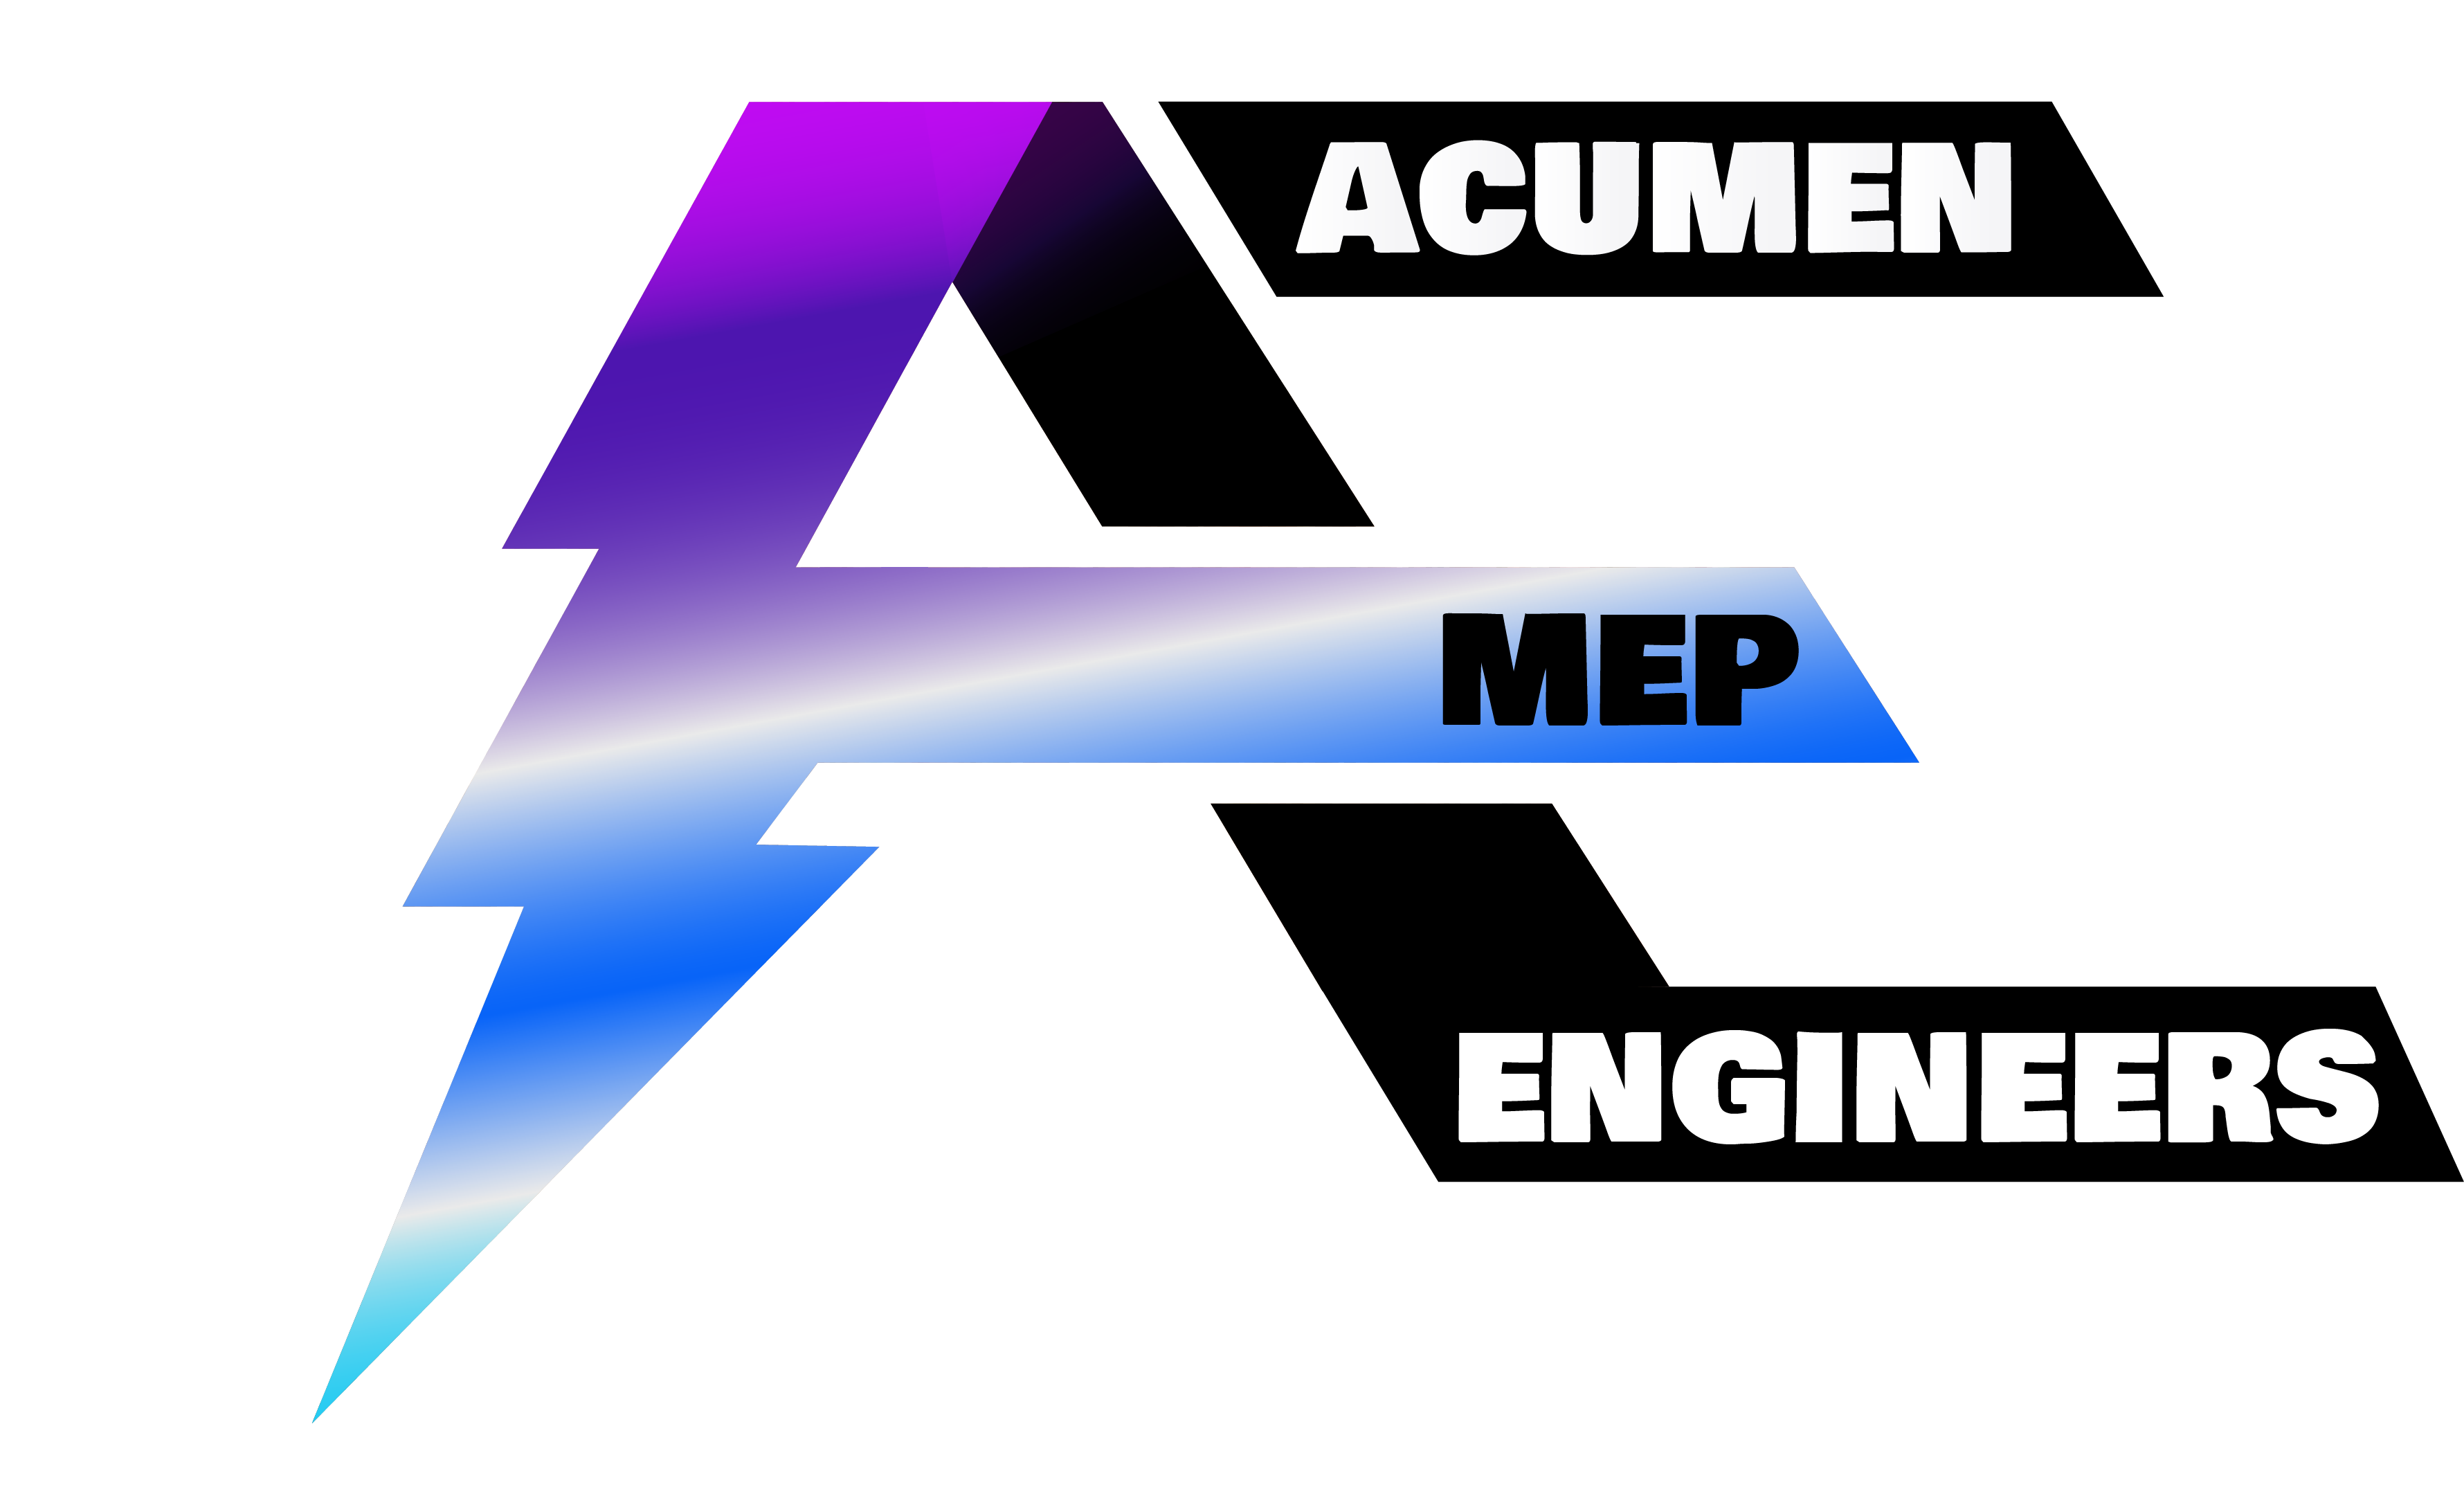 River MEP – Mechanical, Electrical, and Plumbing Engineering design  services.